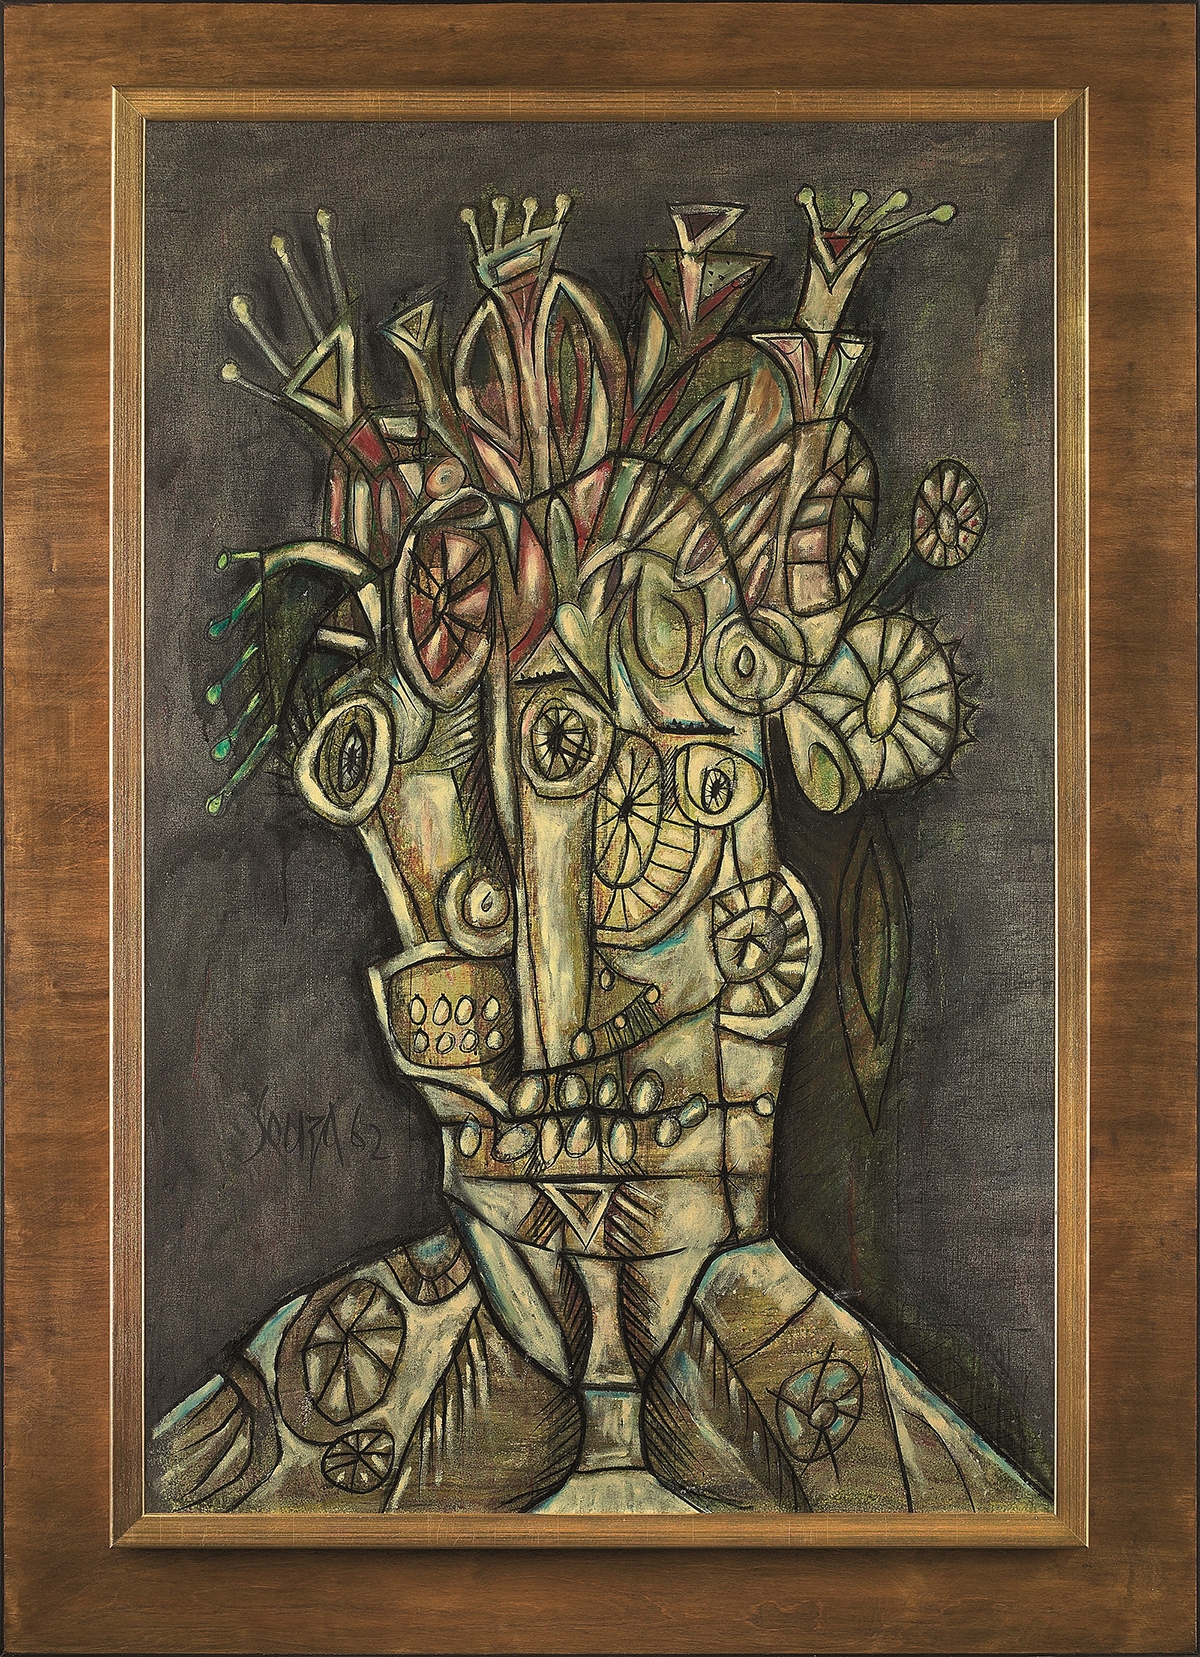 F. N. Souza. Untitled, 1962. Oil on canvas. H. 63 x W. 41 in. (160 x 104.1 cm). Blanca and Sunil Hirani Asian Art Collection. ©2010 Christie's Images Limited